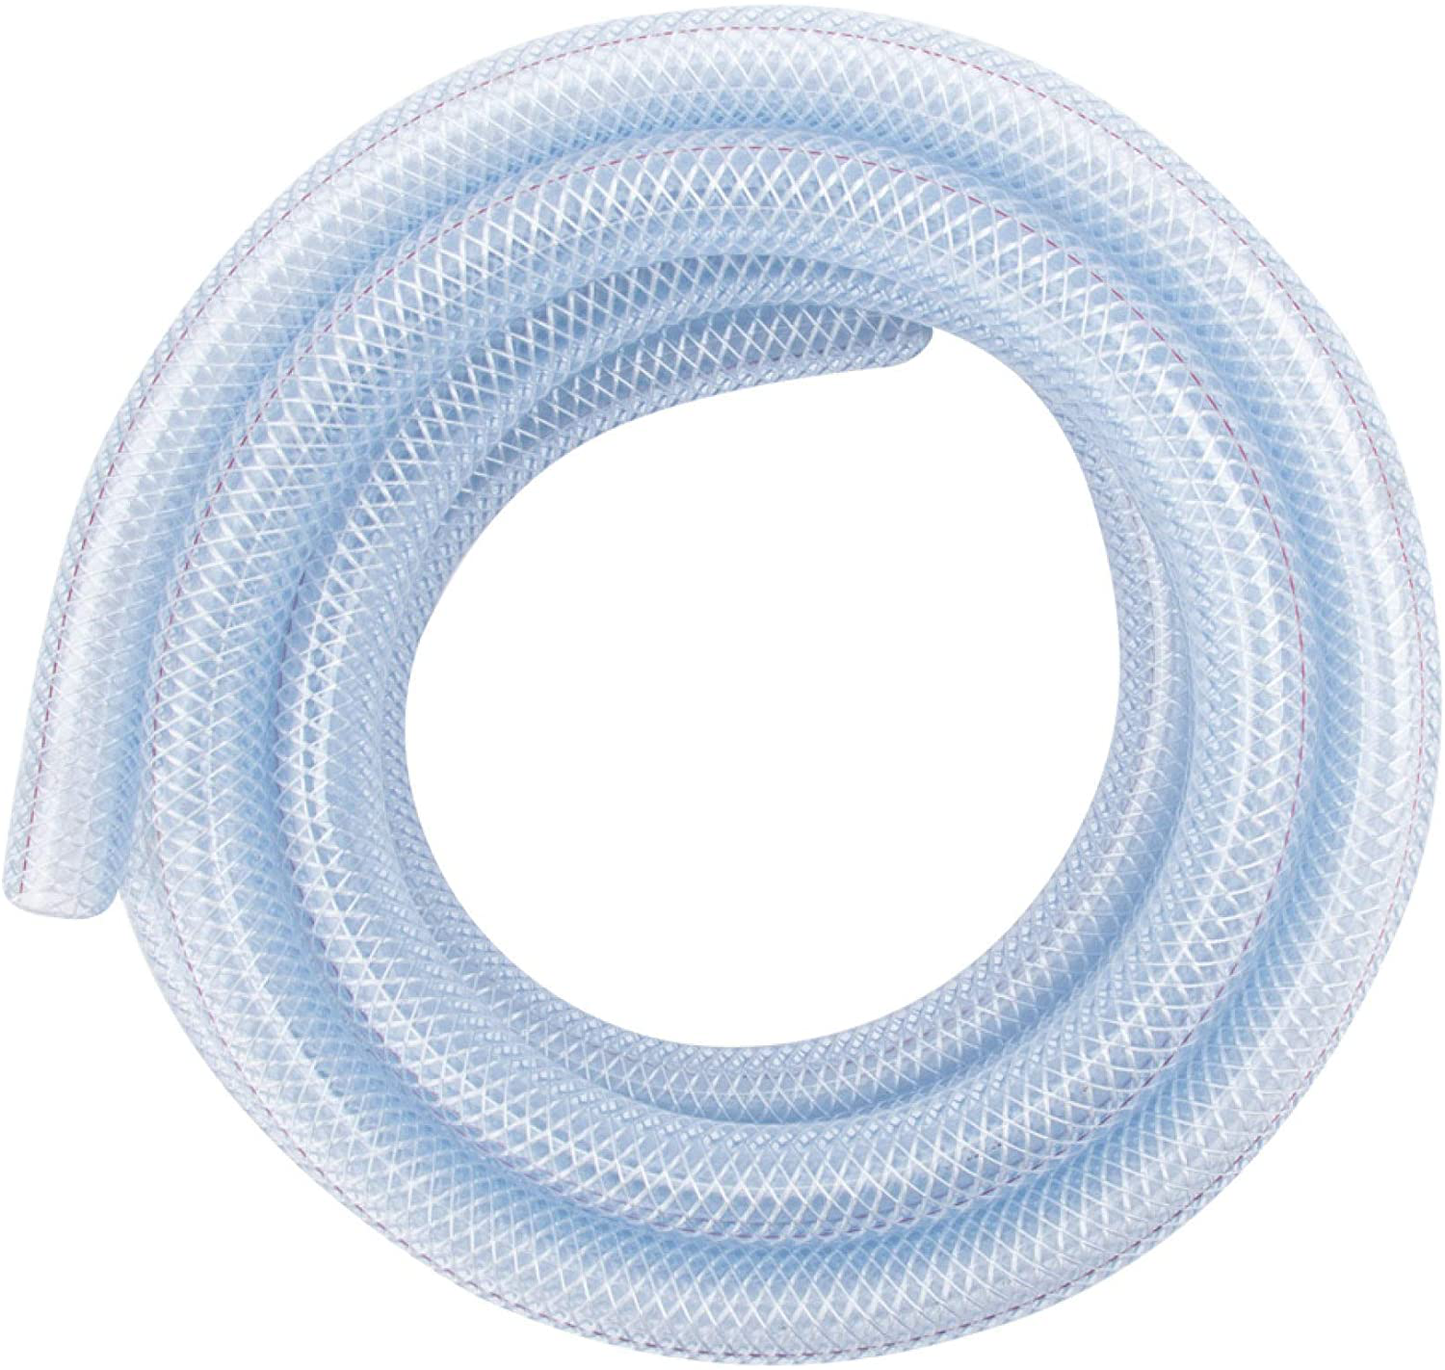 LDR Industries 516 B1210 Clear Braided Nylon Poly Tubing Flexible Non-Toxic, 1/2 Diameter X 10Ft, Finish, 10', 10 Feet Animals & Pet Supplies > Pet Supplies > Fish Supplies > Aquarium & Pond Tubing LDR Industries 1/2" x 10' - Pack of Four  